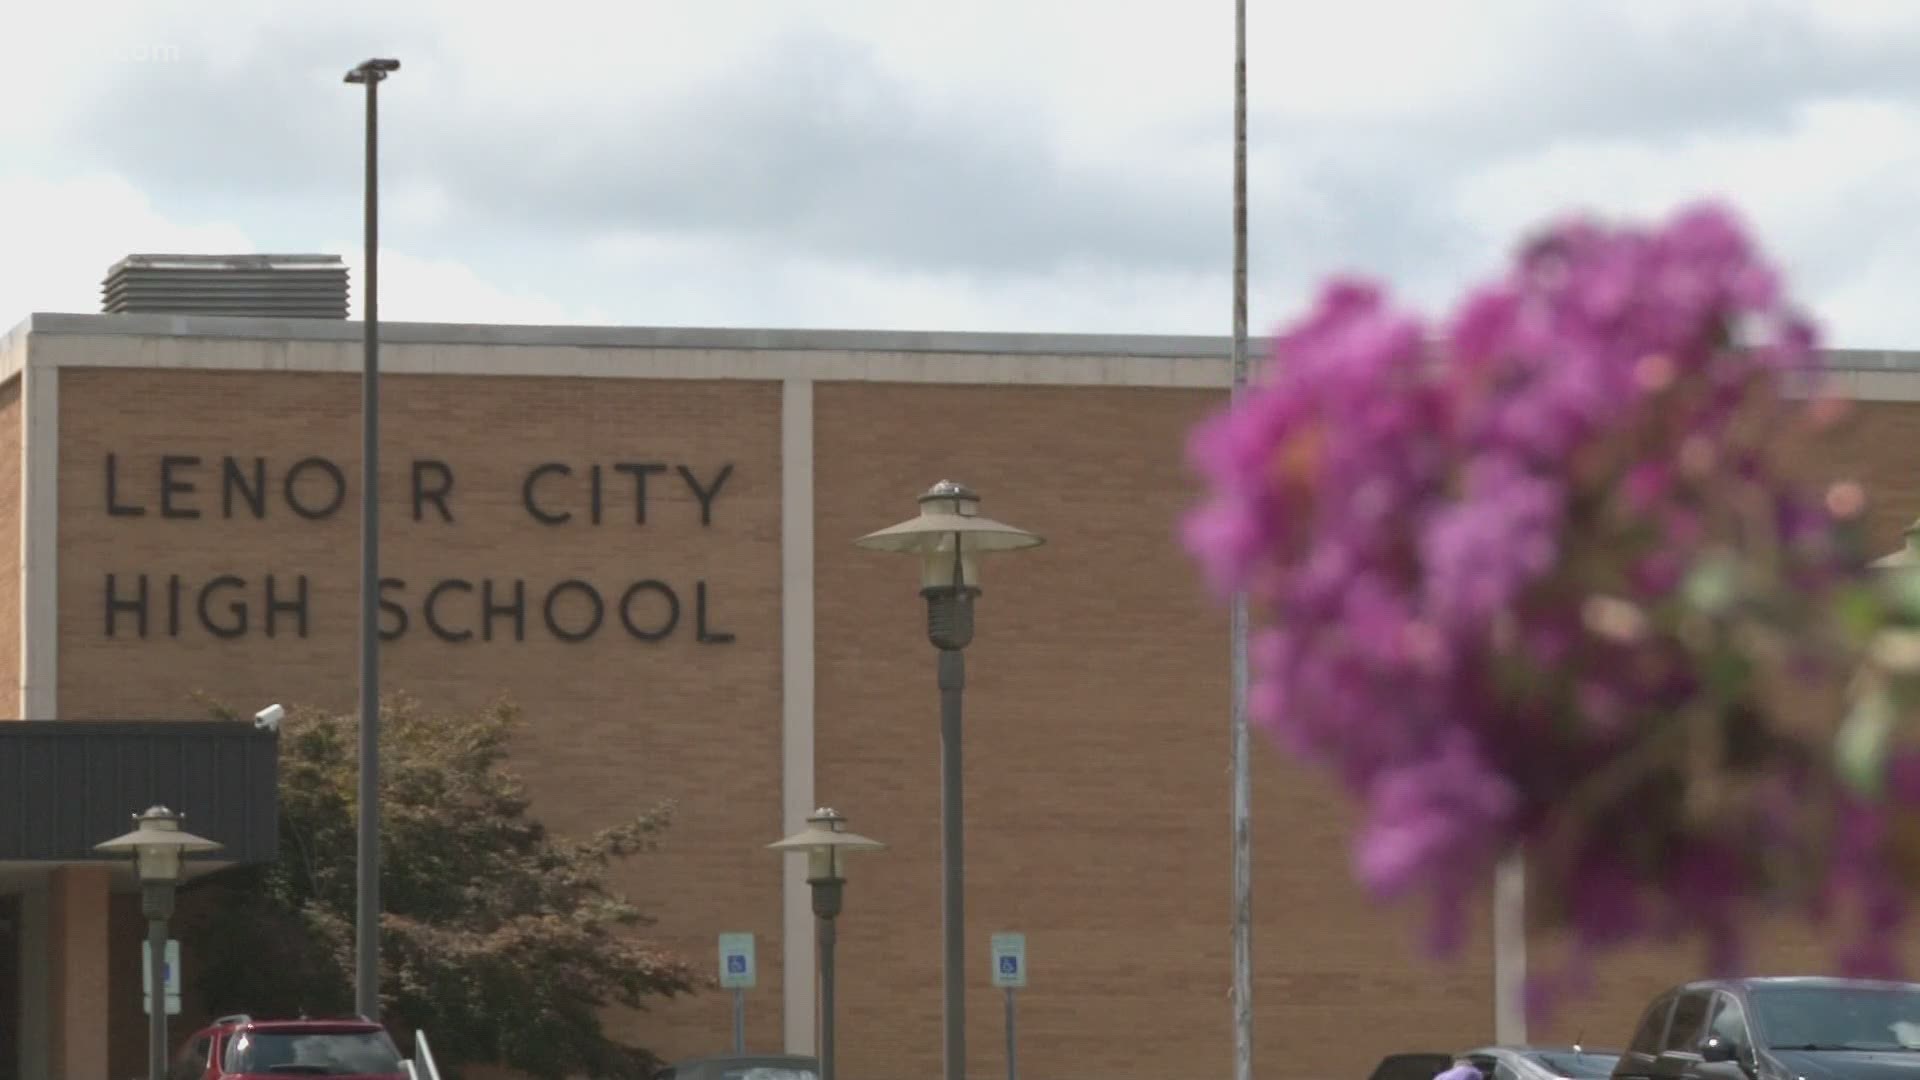 Lenoir City High School is the first school in East Tennessee to roll back reopening plans after the first day of in-person classes.